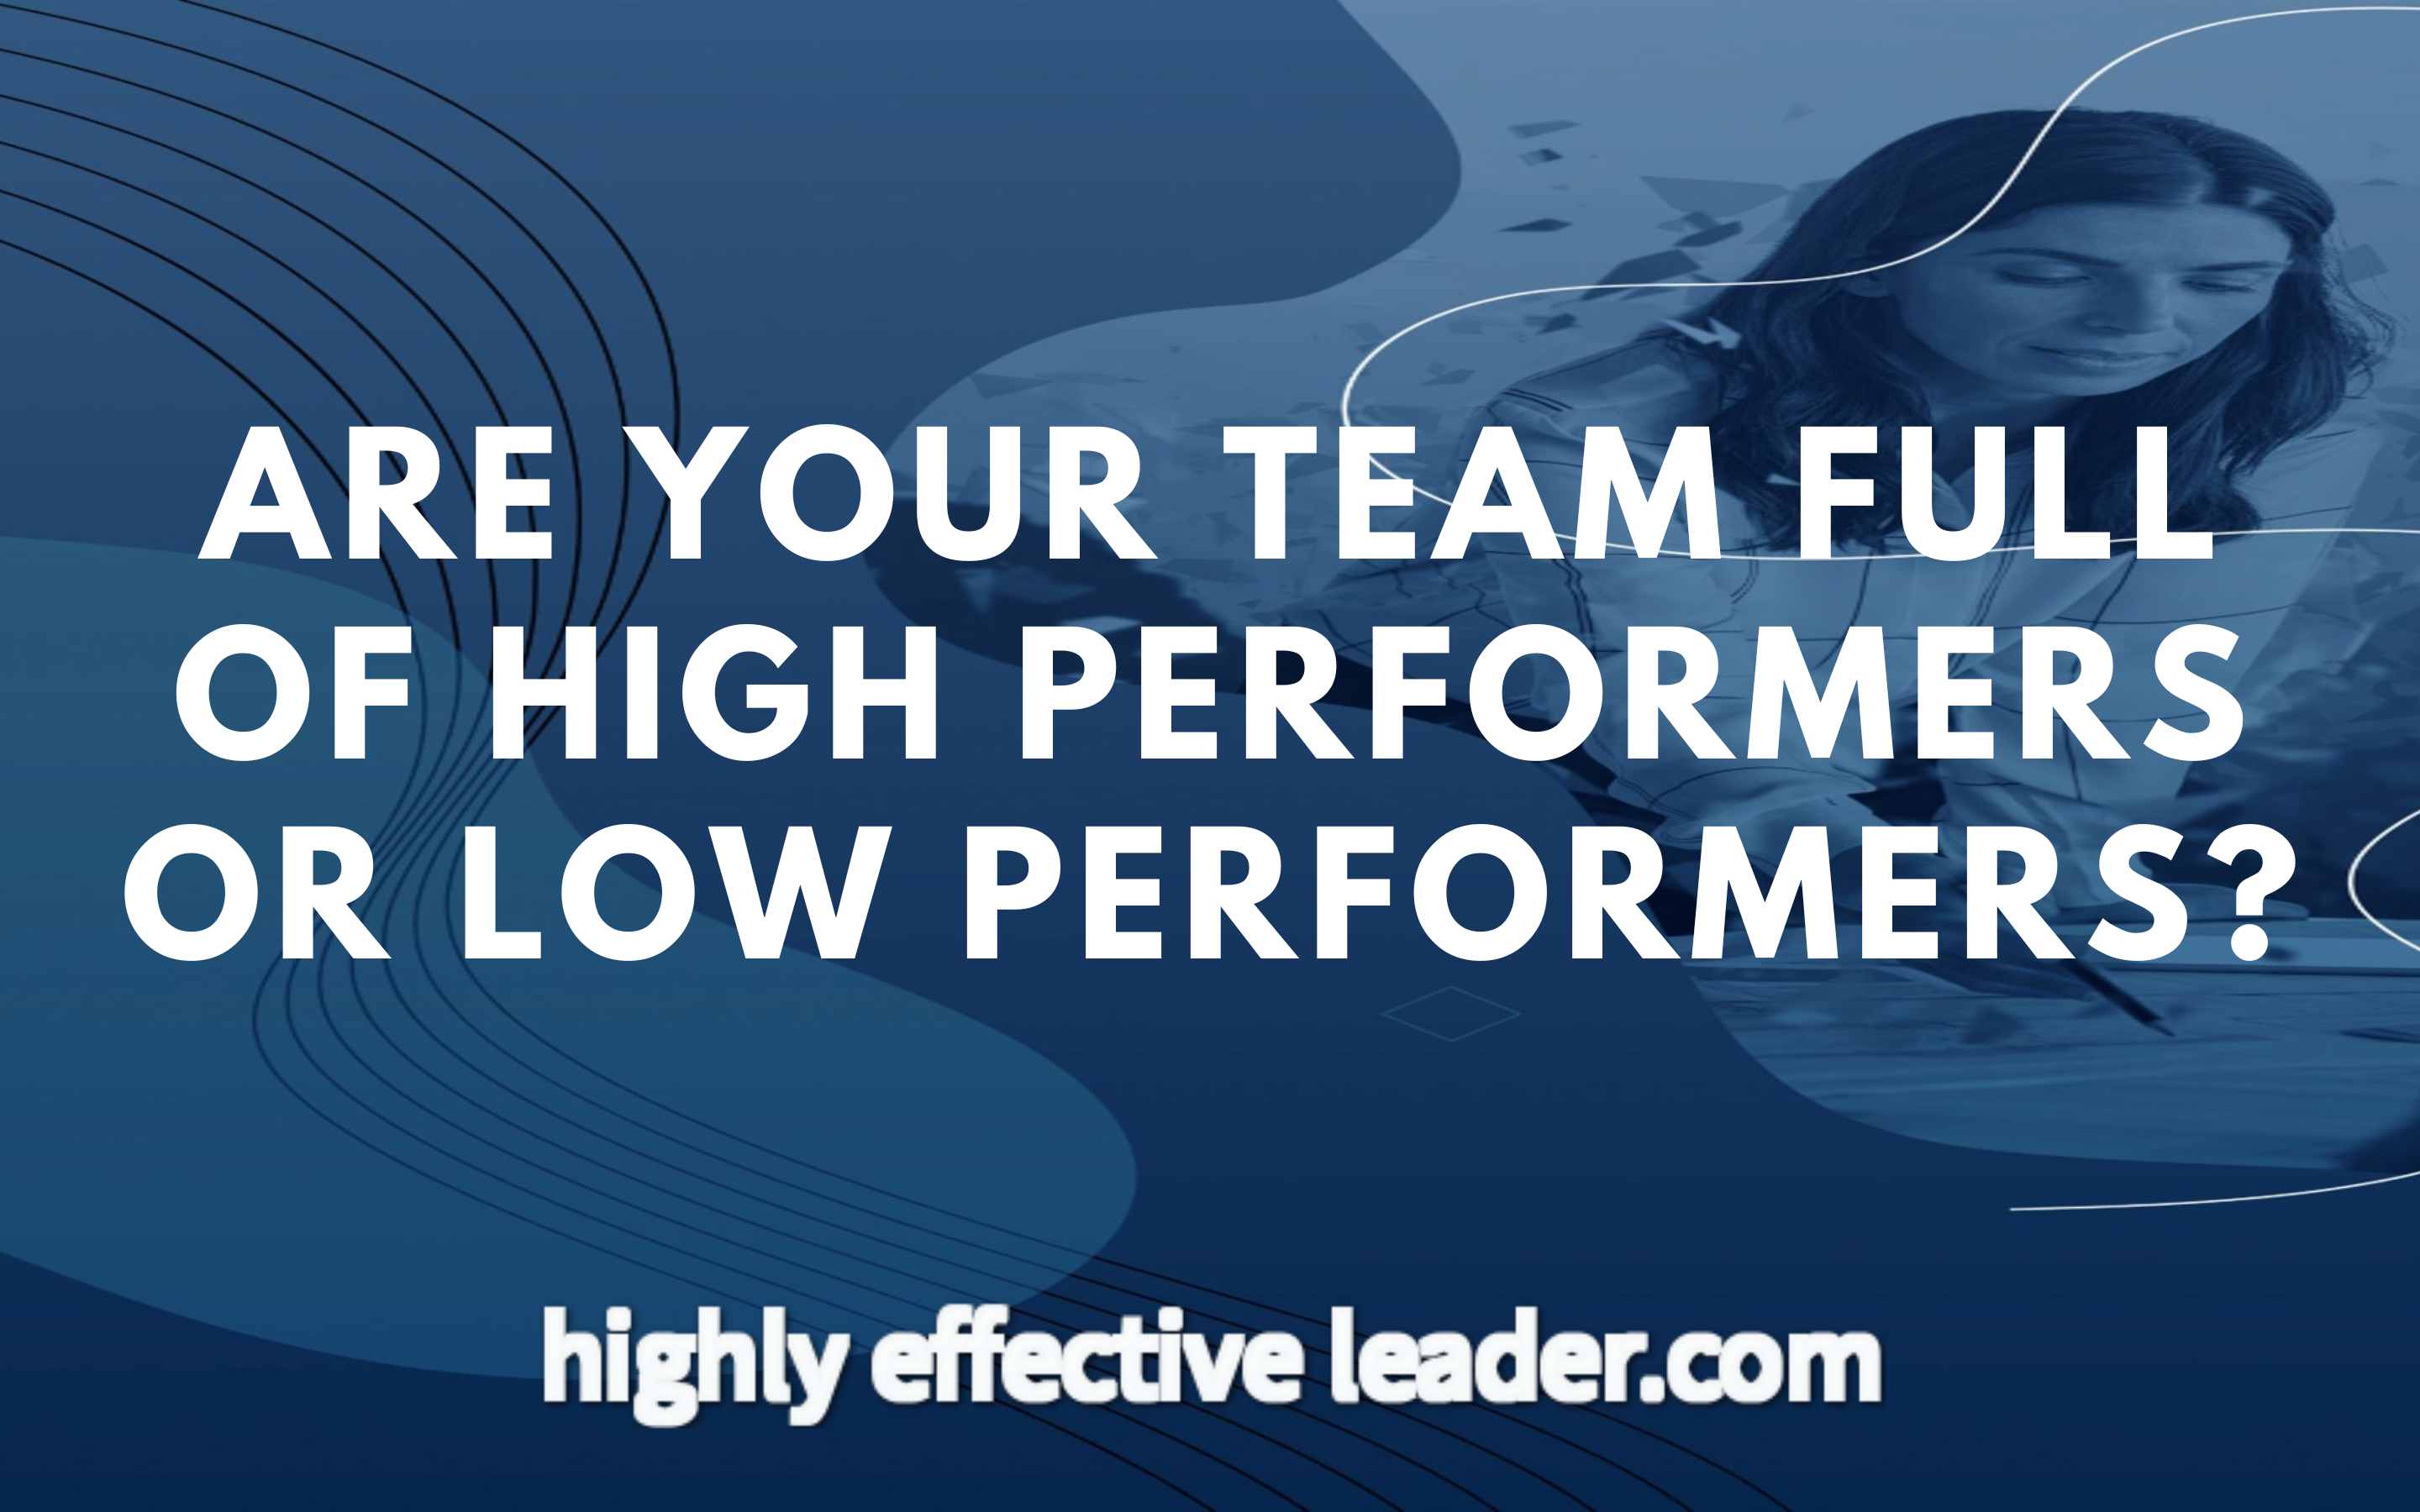 Do You Lead High Performers?